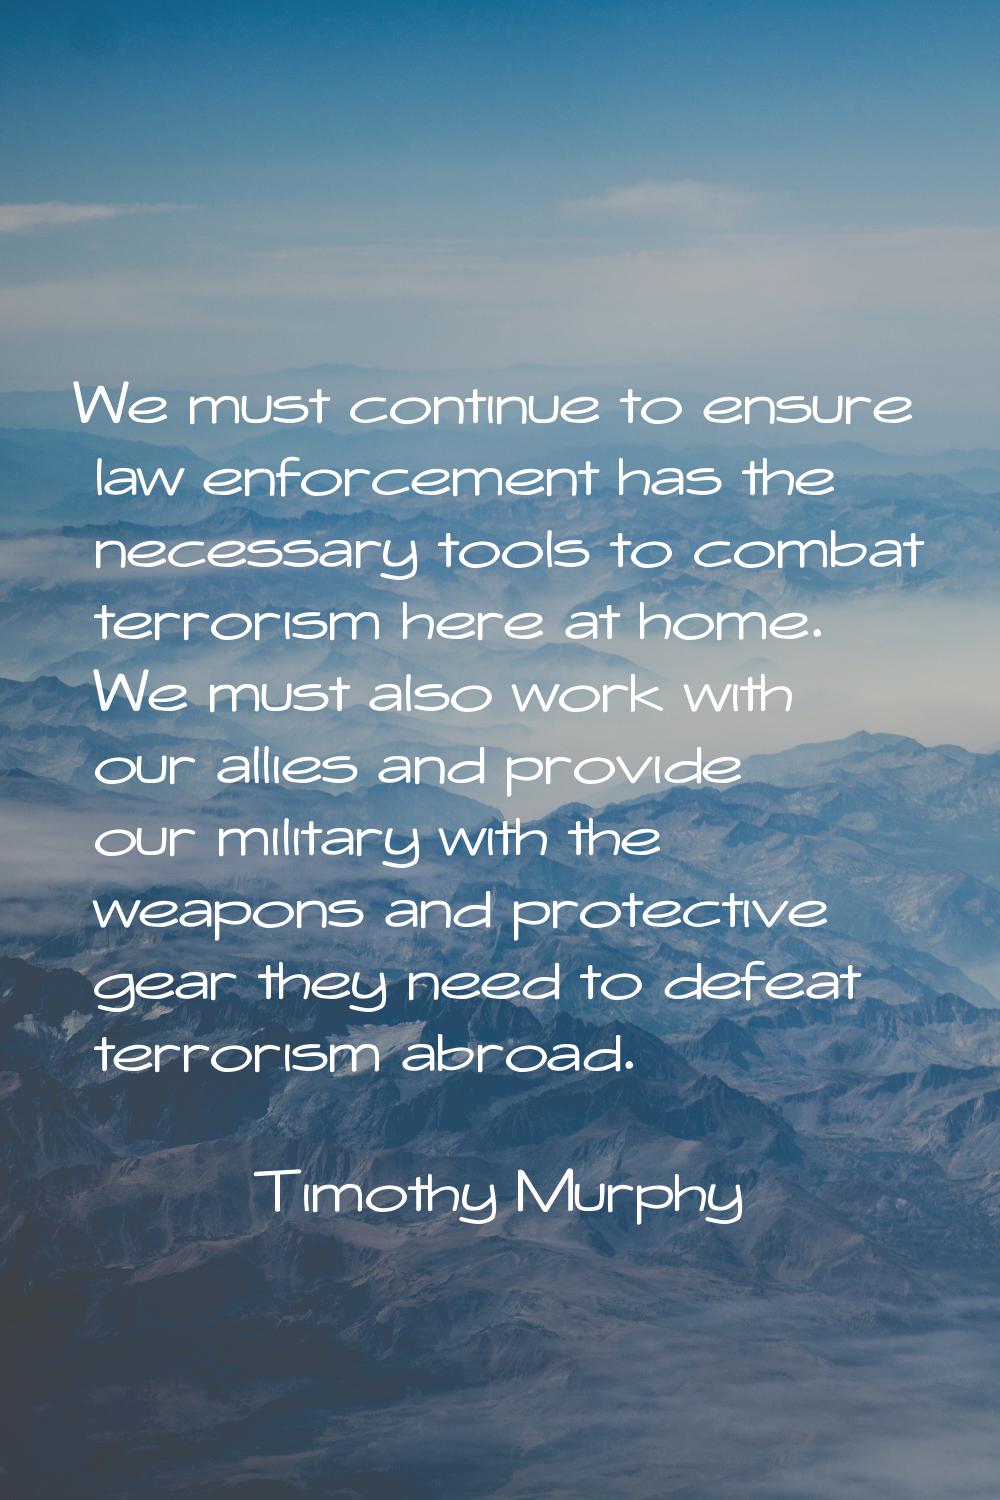 We must continue to ensure law enforcement has the necessary tools to combat terrorism here at home